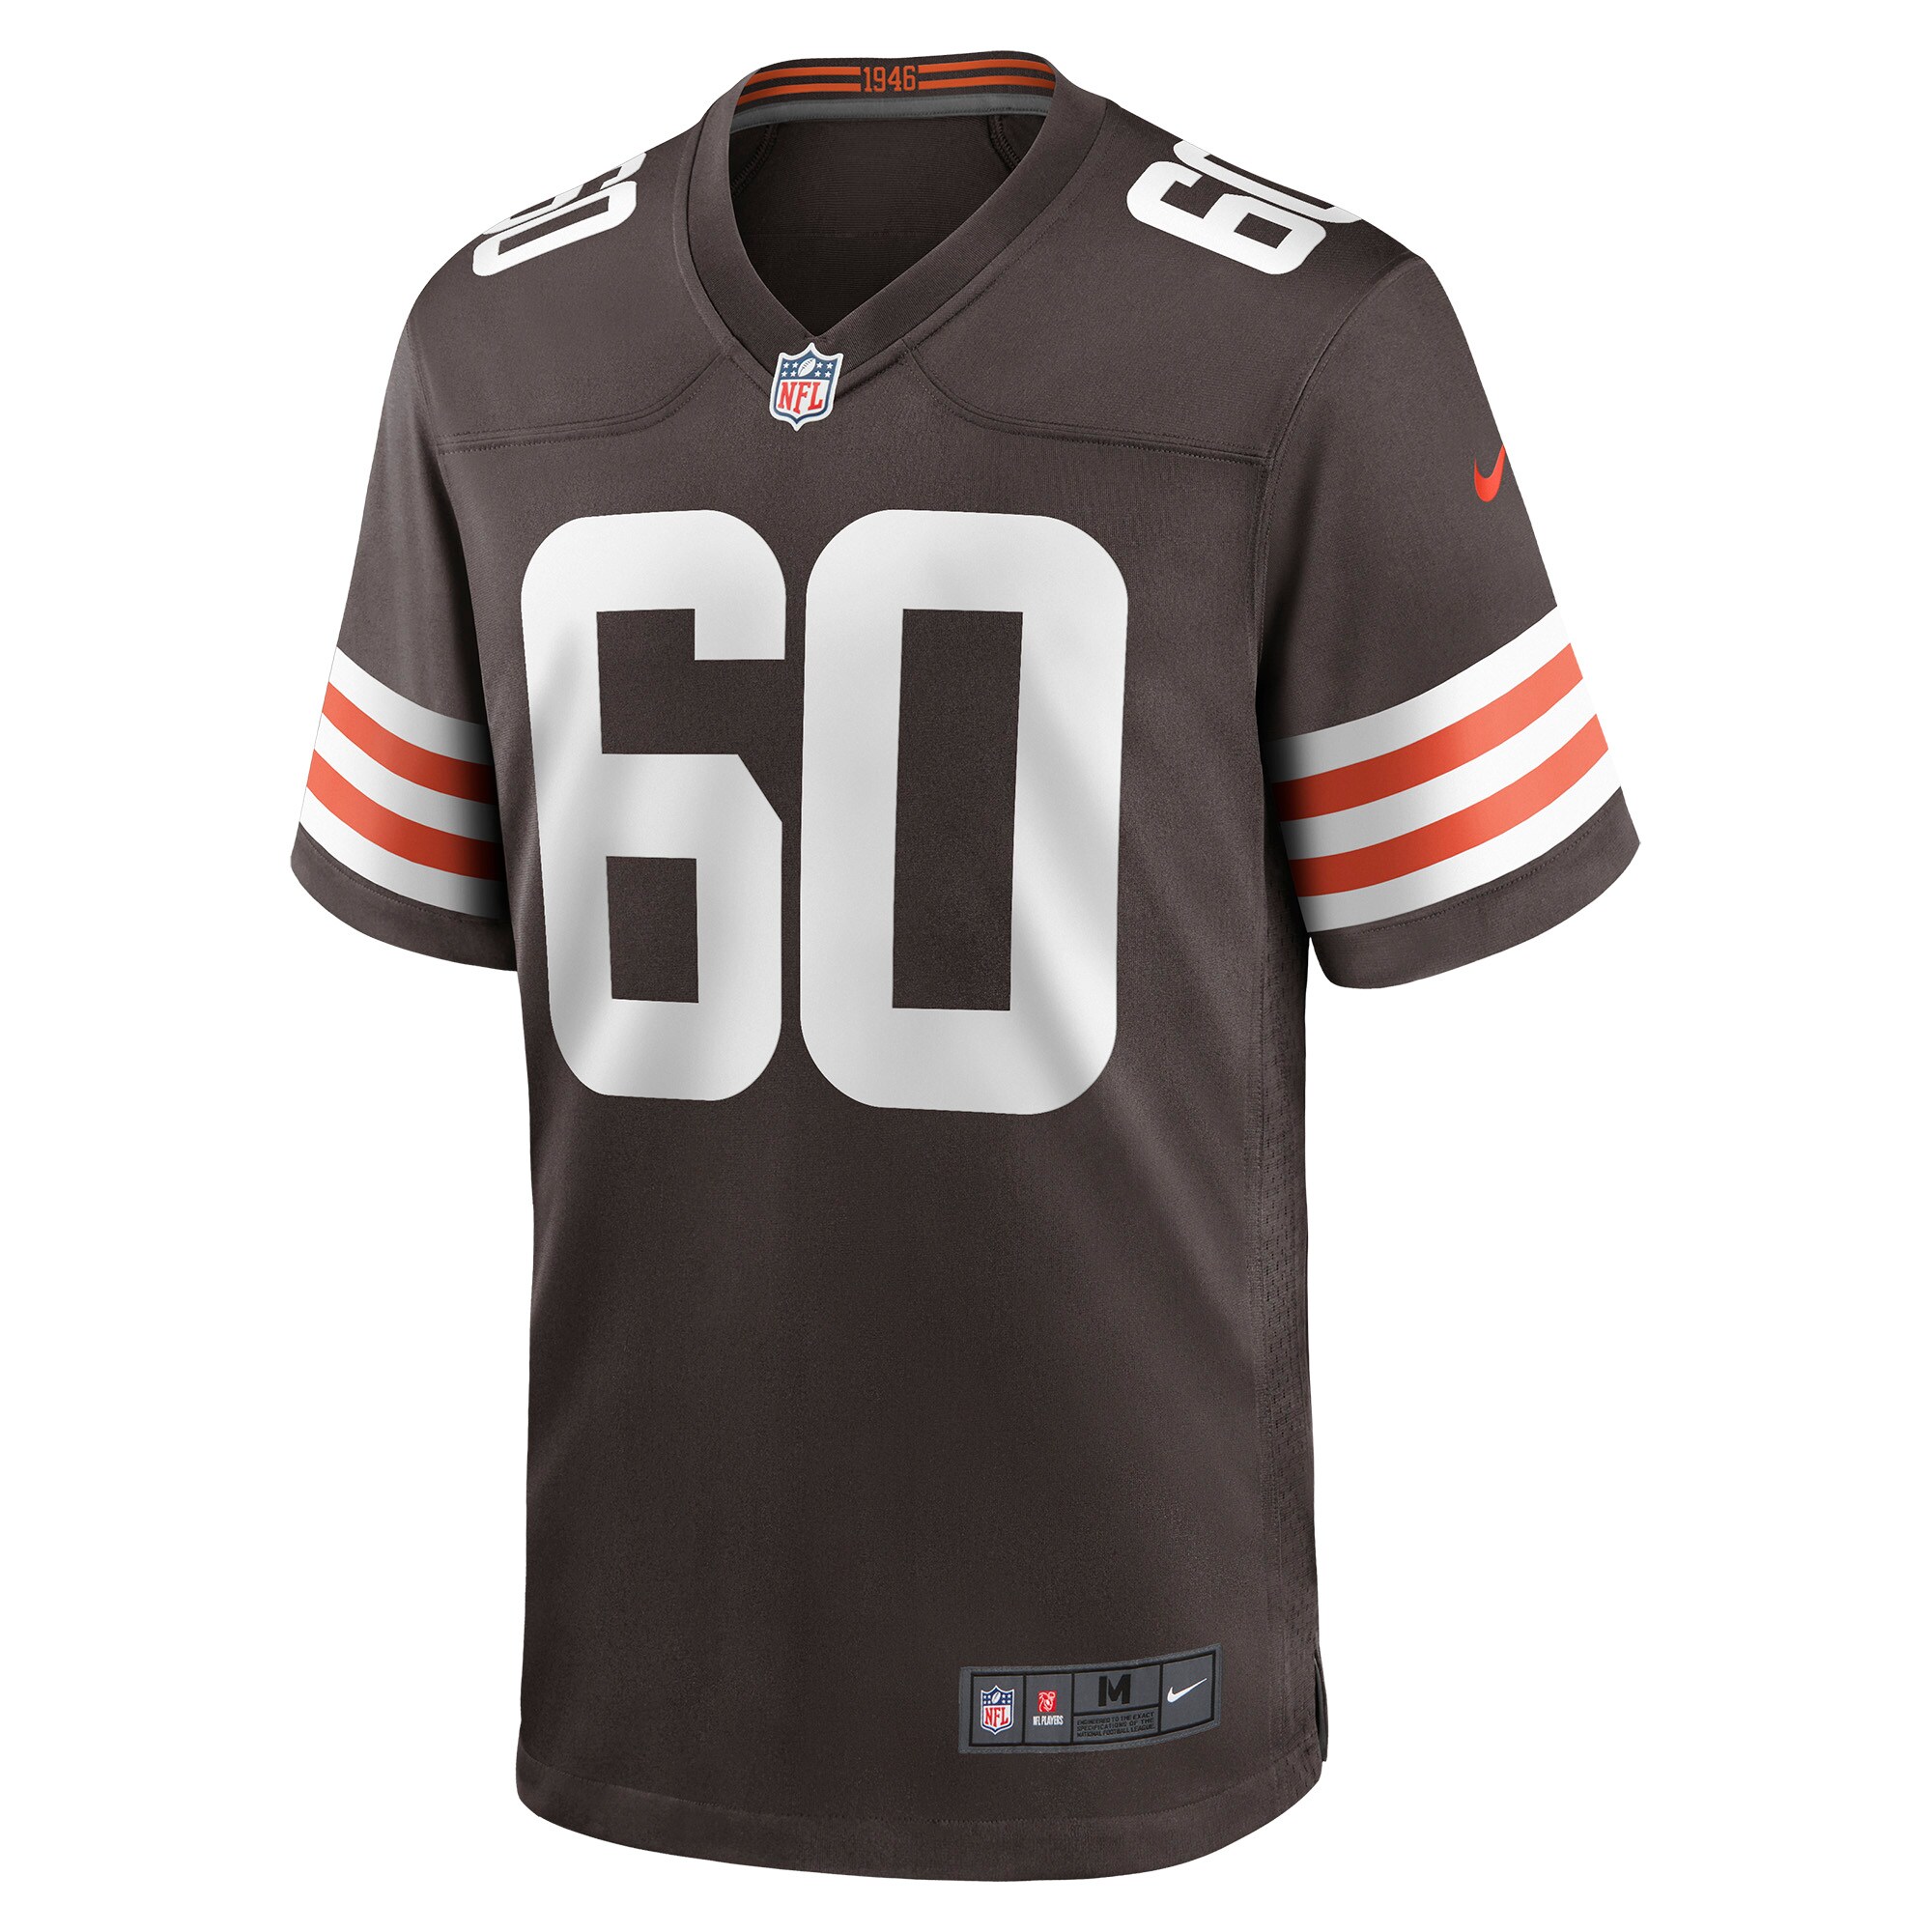 Men's Cleveland Browns David Moore Nike Brown Game Jersey